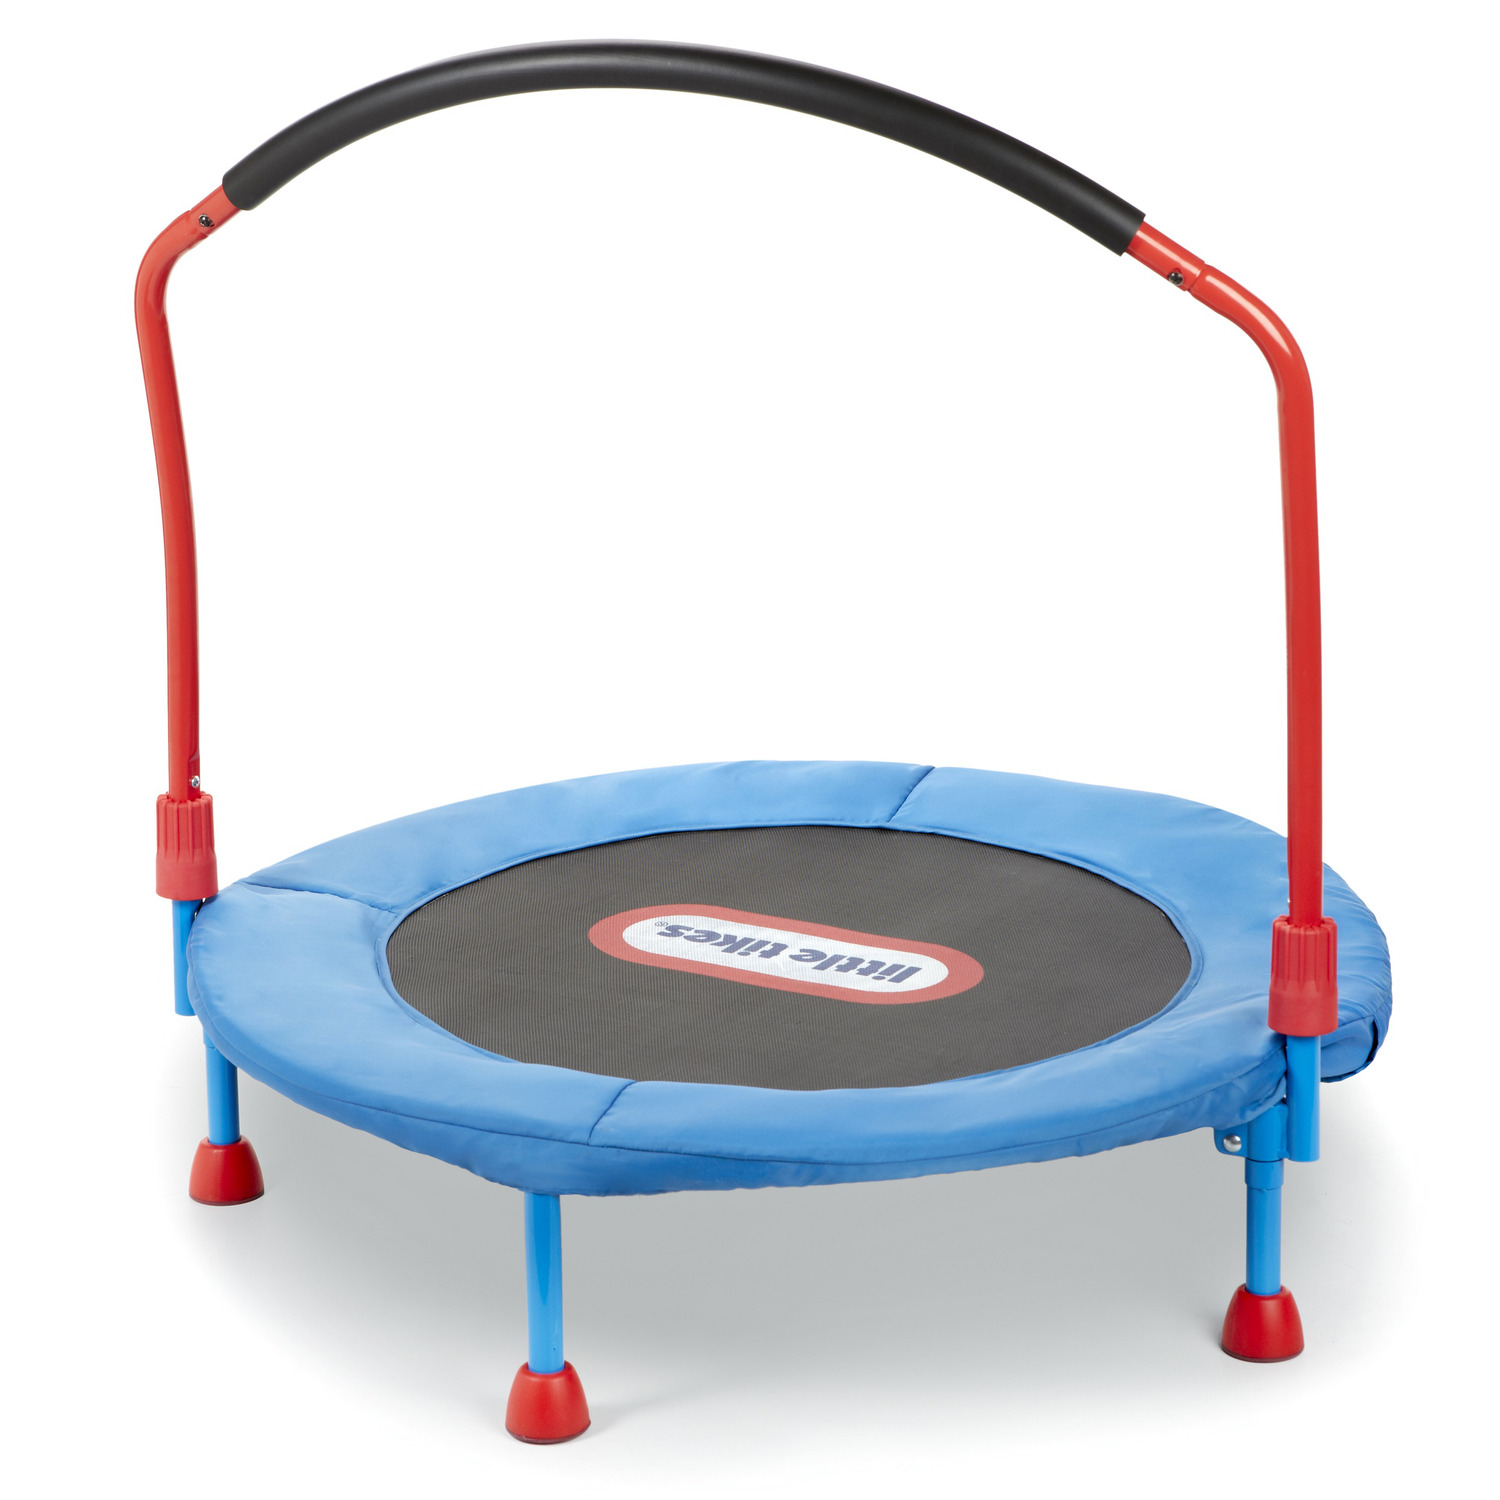 Little Tikes Easy Store 3-Foot Trampoline, with Hand Rail, Blue/Red